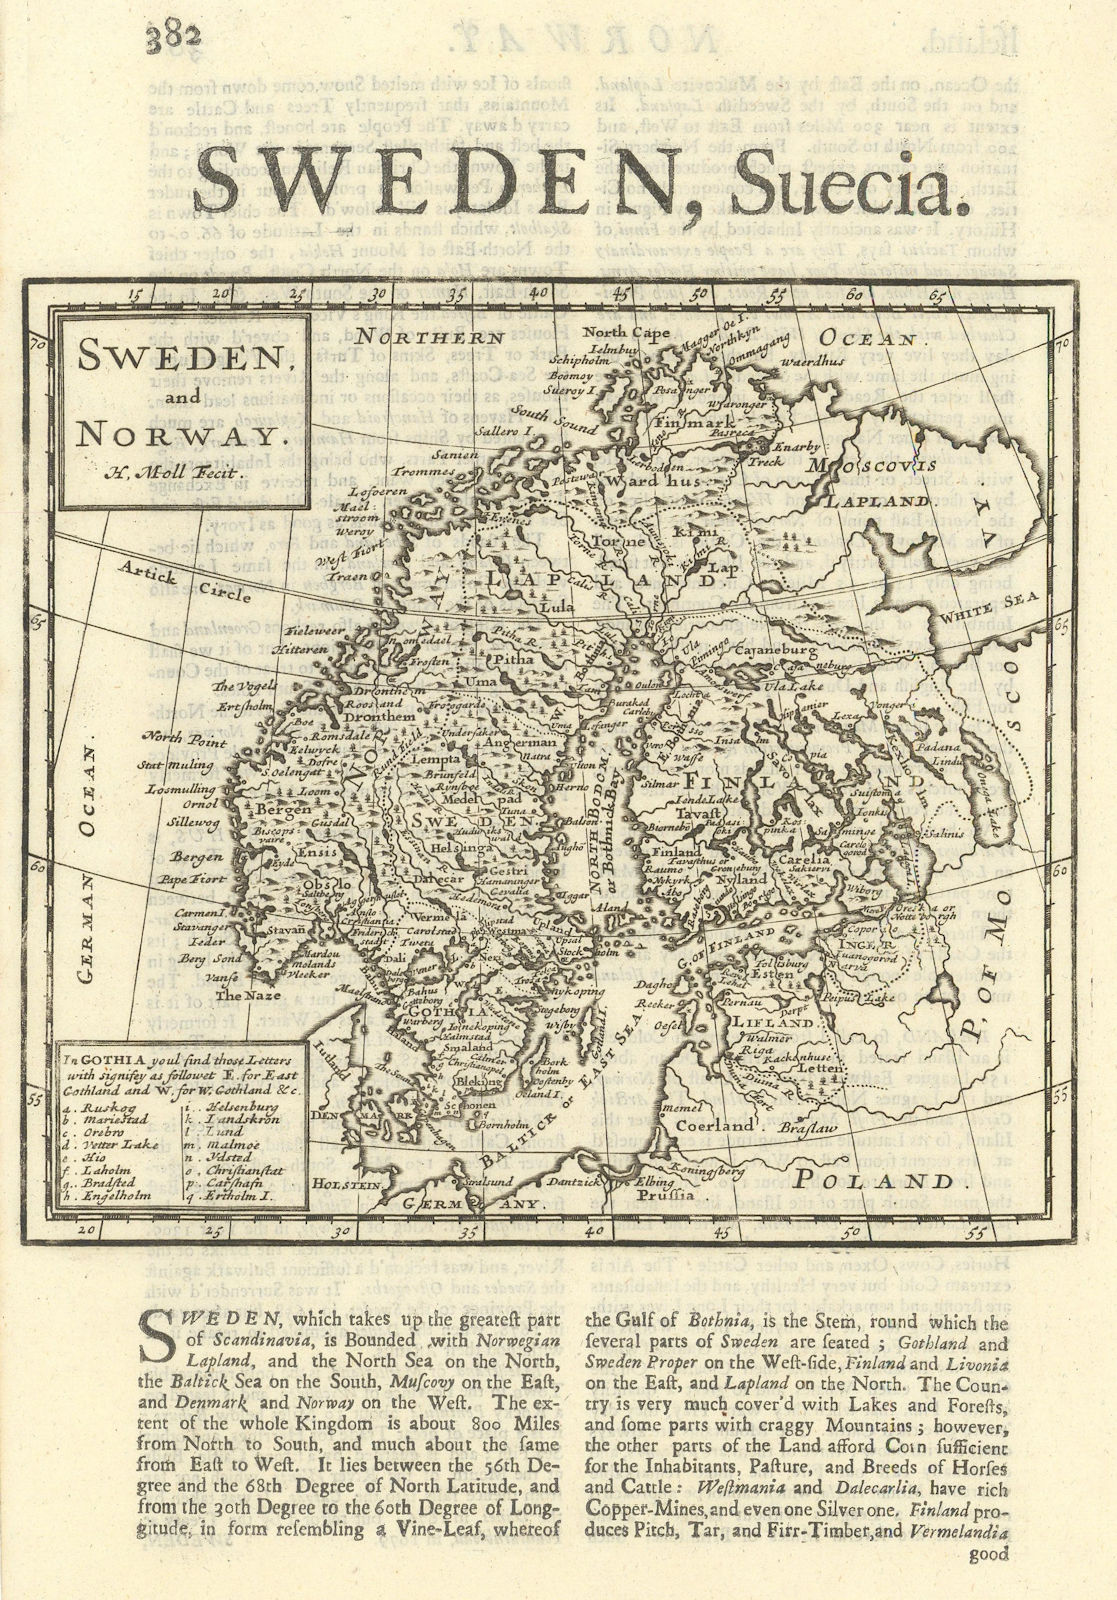 Associate Product Sweden and Norway by Herman Moll. Scandinavia Finland 1709 old antique map